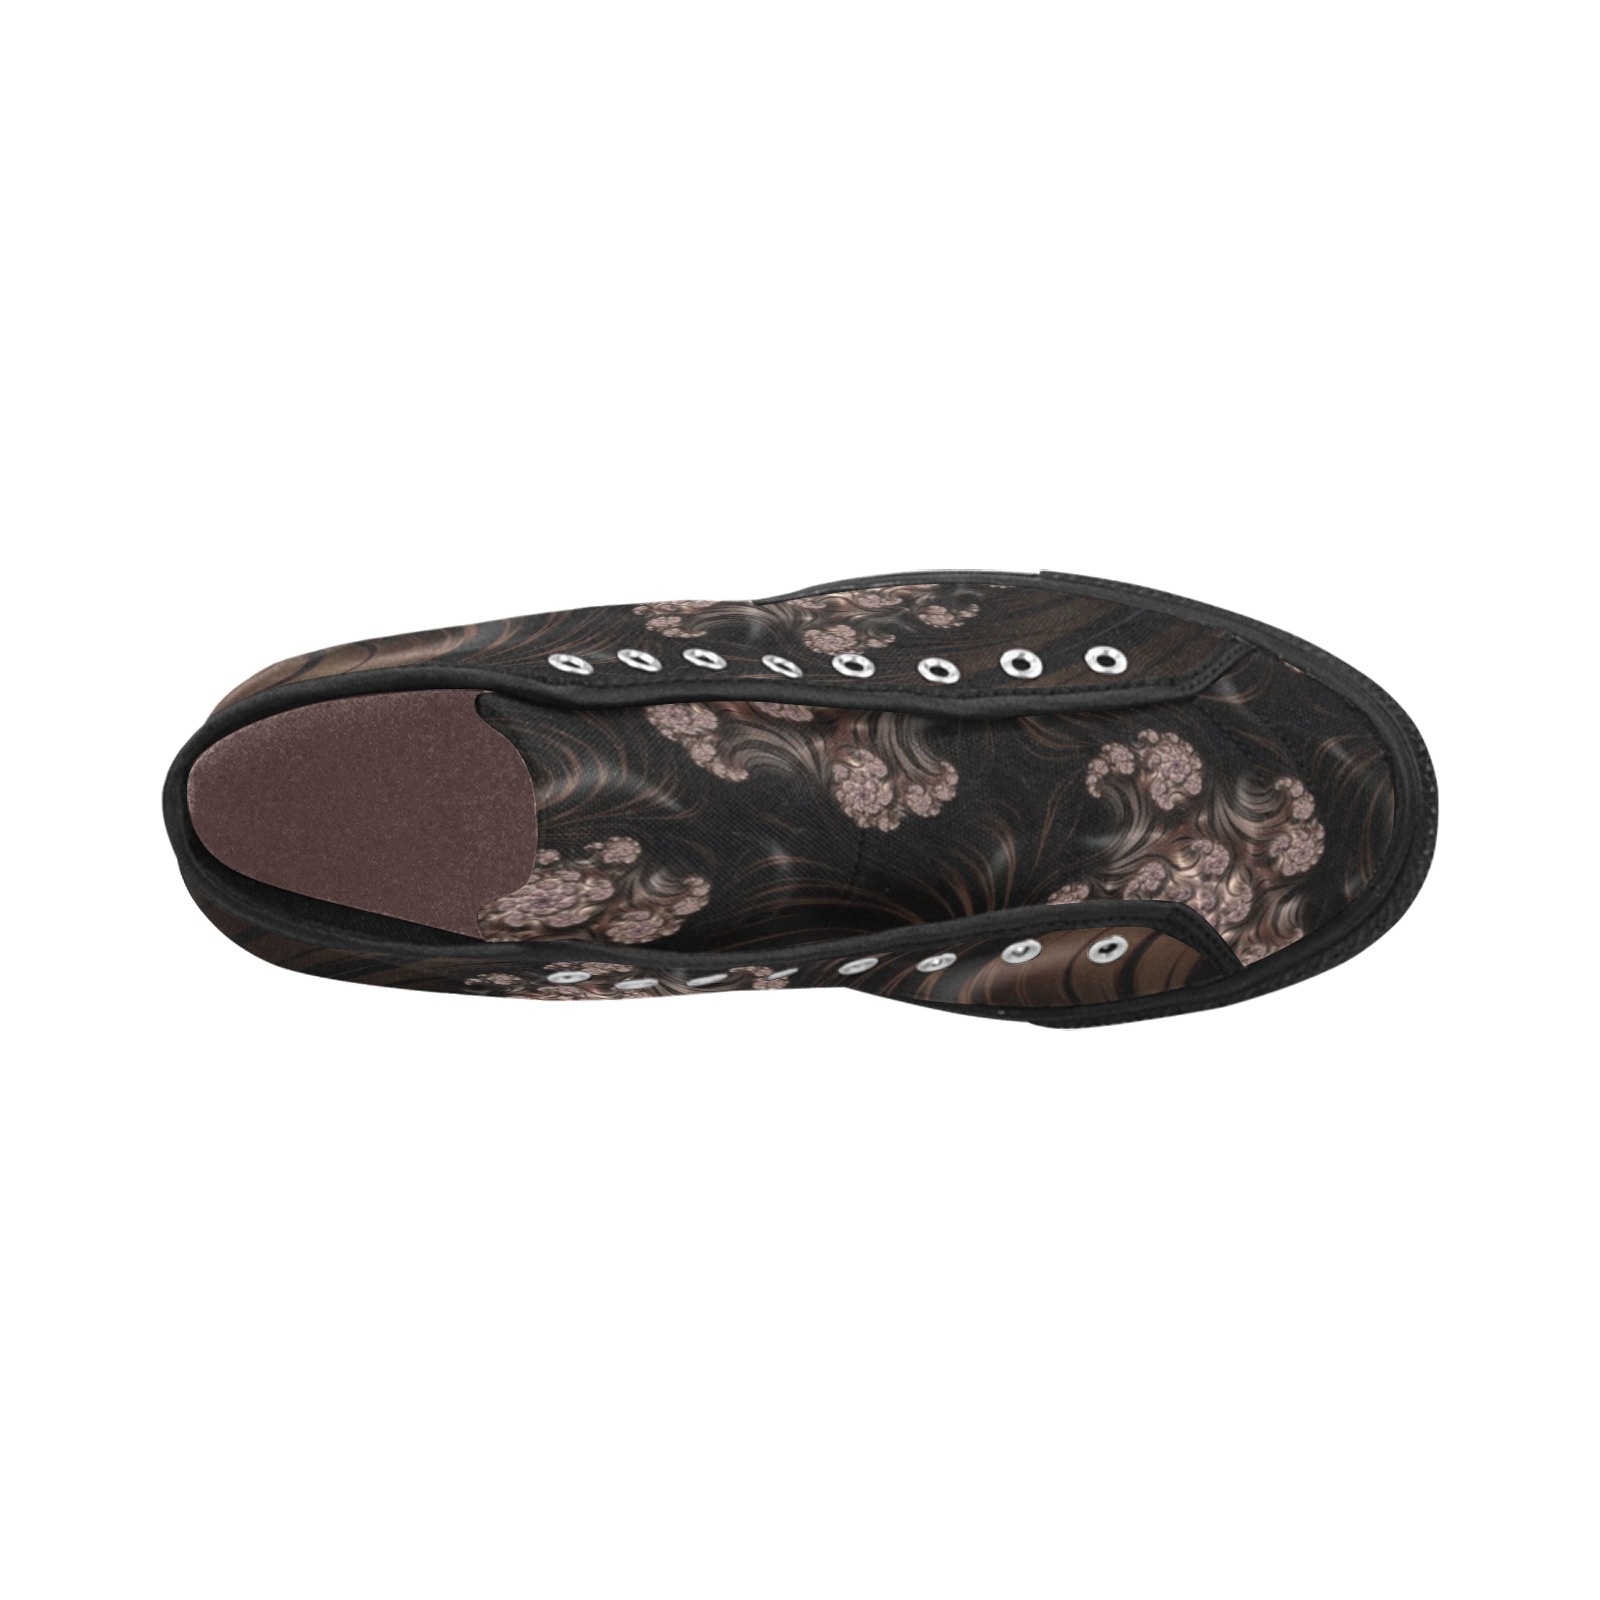 Blossoms and Dark Chocolate Swirls Fractal Abstract Vancouver H Men's Canvas Shoes (1013-1)